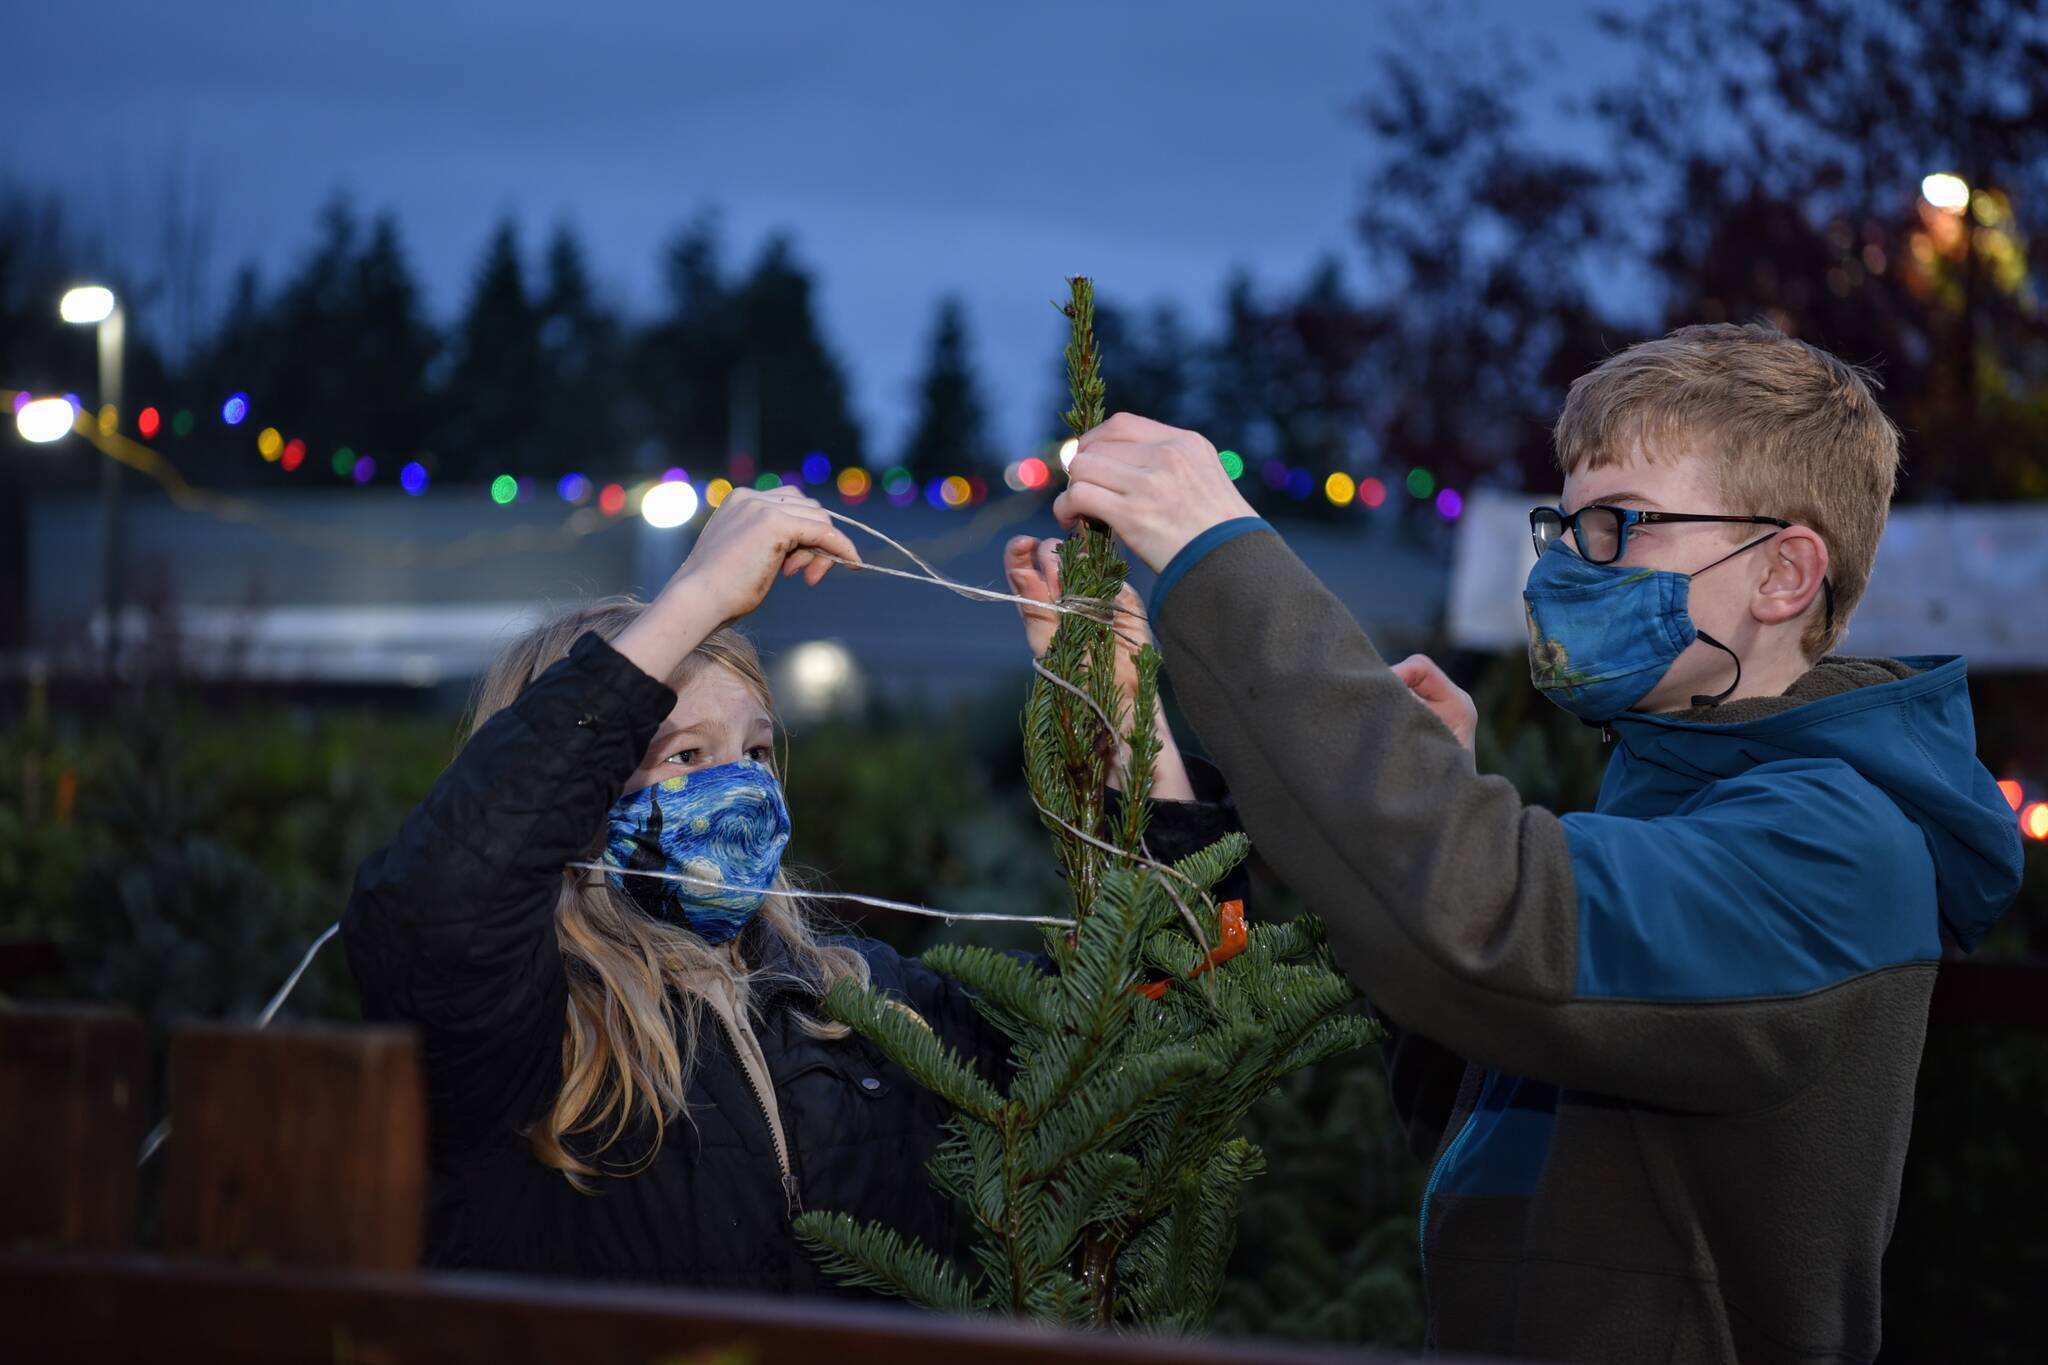 Scouts Adrian Meidell and Nathan Cole untie trees for customers at the Boy Scout Christmas Tree lot on High School Road.